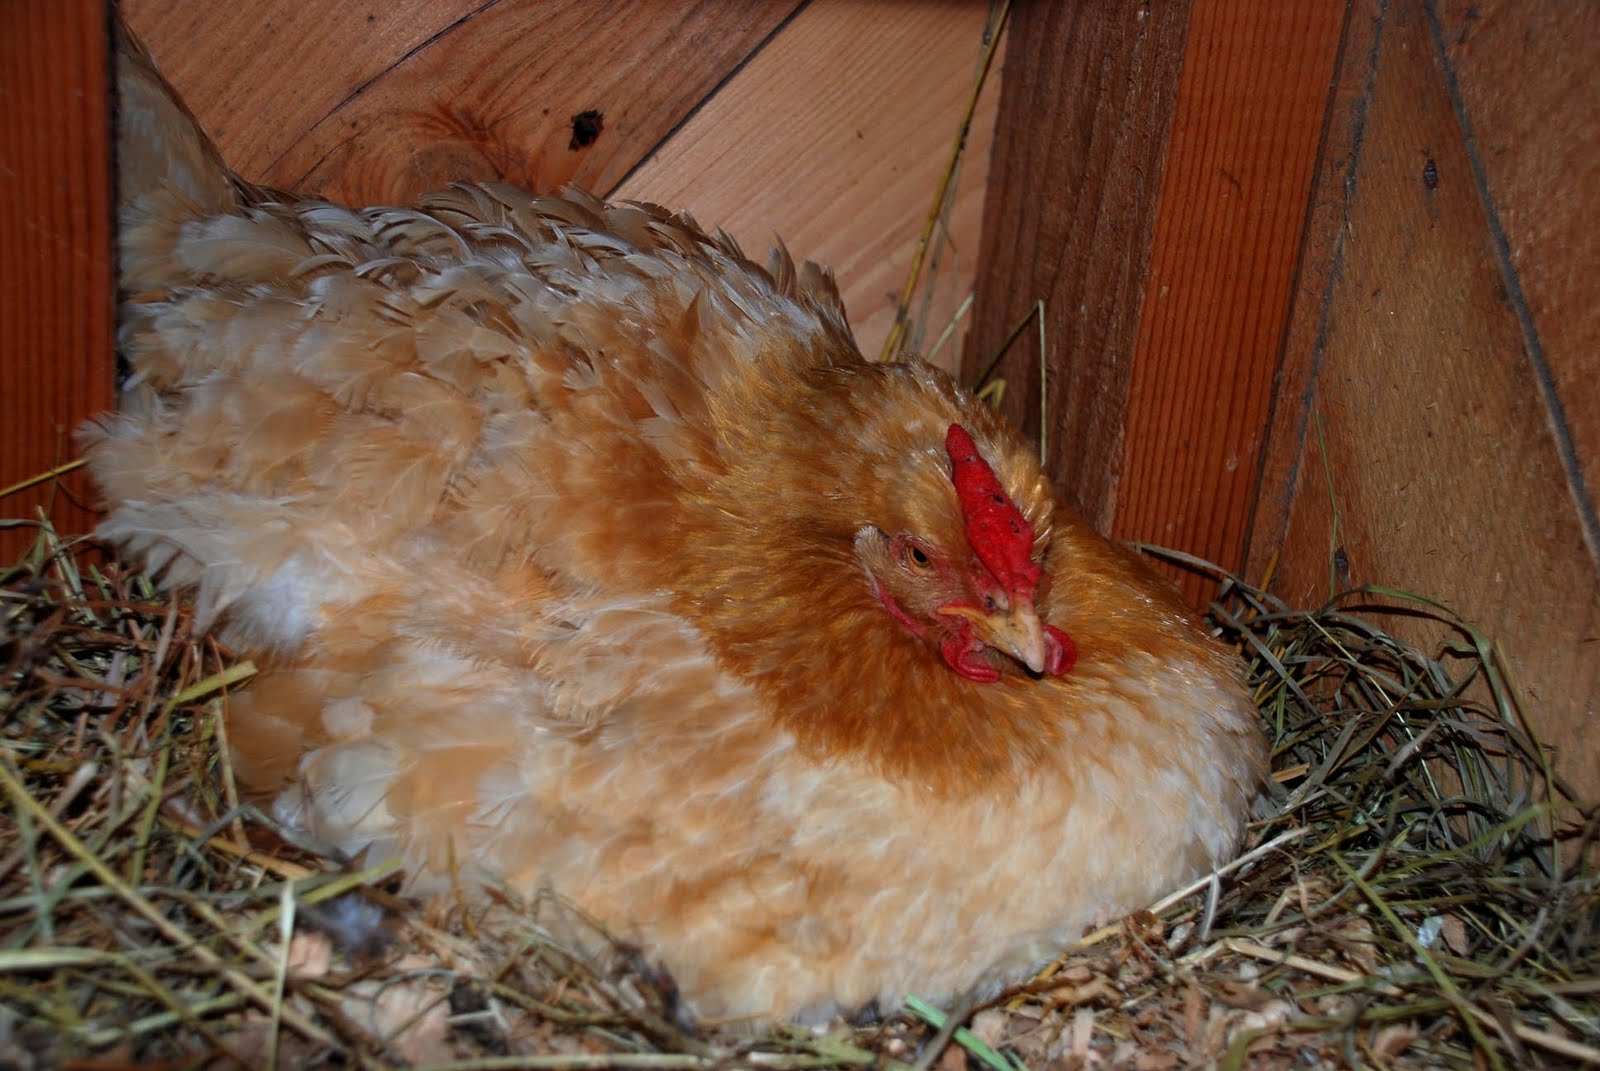 Hatching chicken eggs naturally under a broody hen | The Poultry Guide